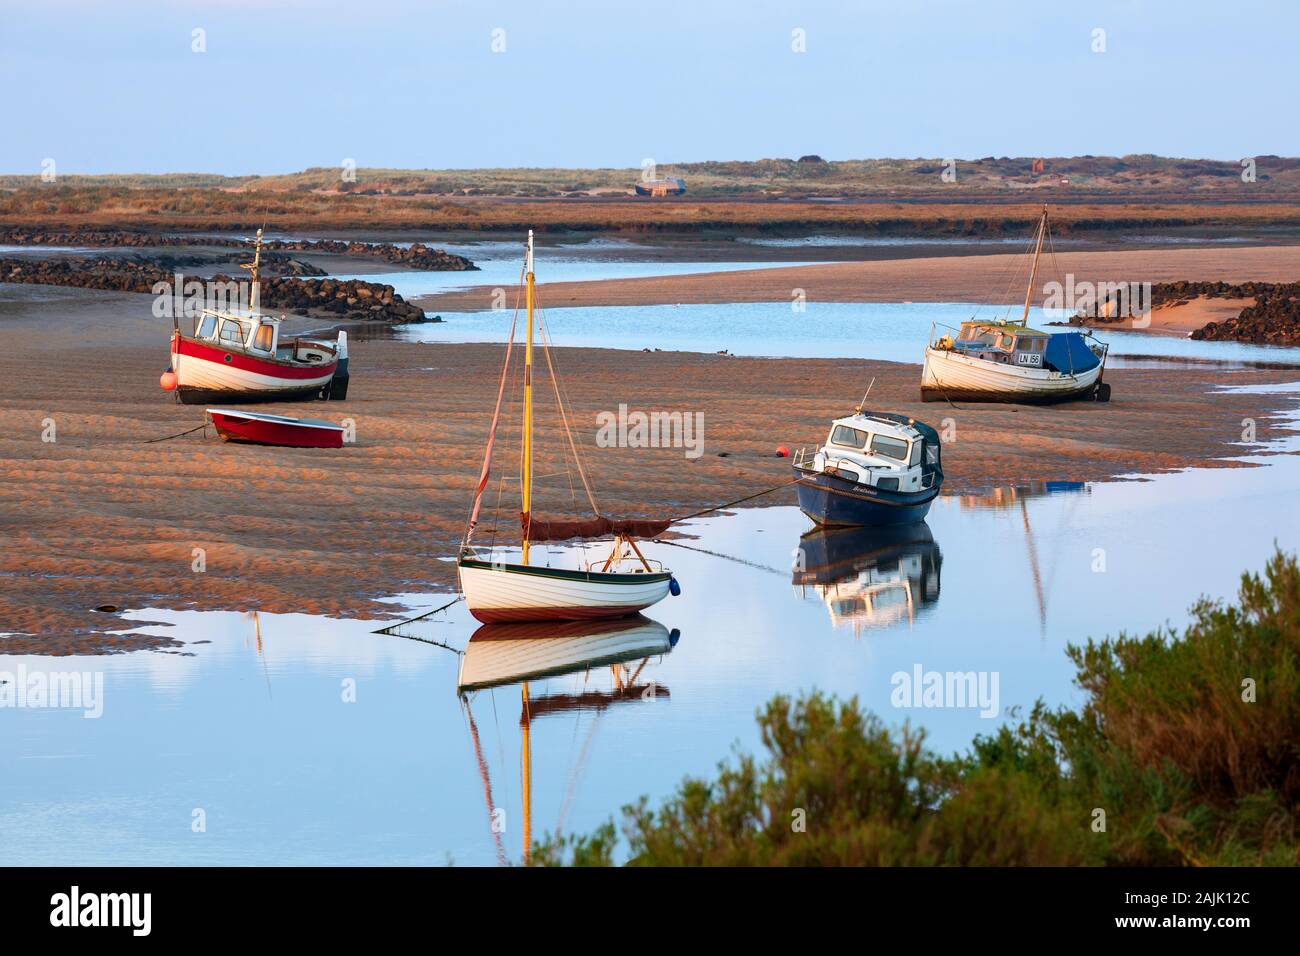 Boats on the River Burn sand at low tide at sunset, Burnham Overy Staithe, Norfolk, England, United Kingdom, Europe Stock Photo